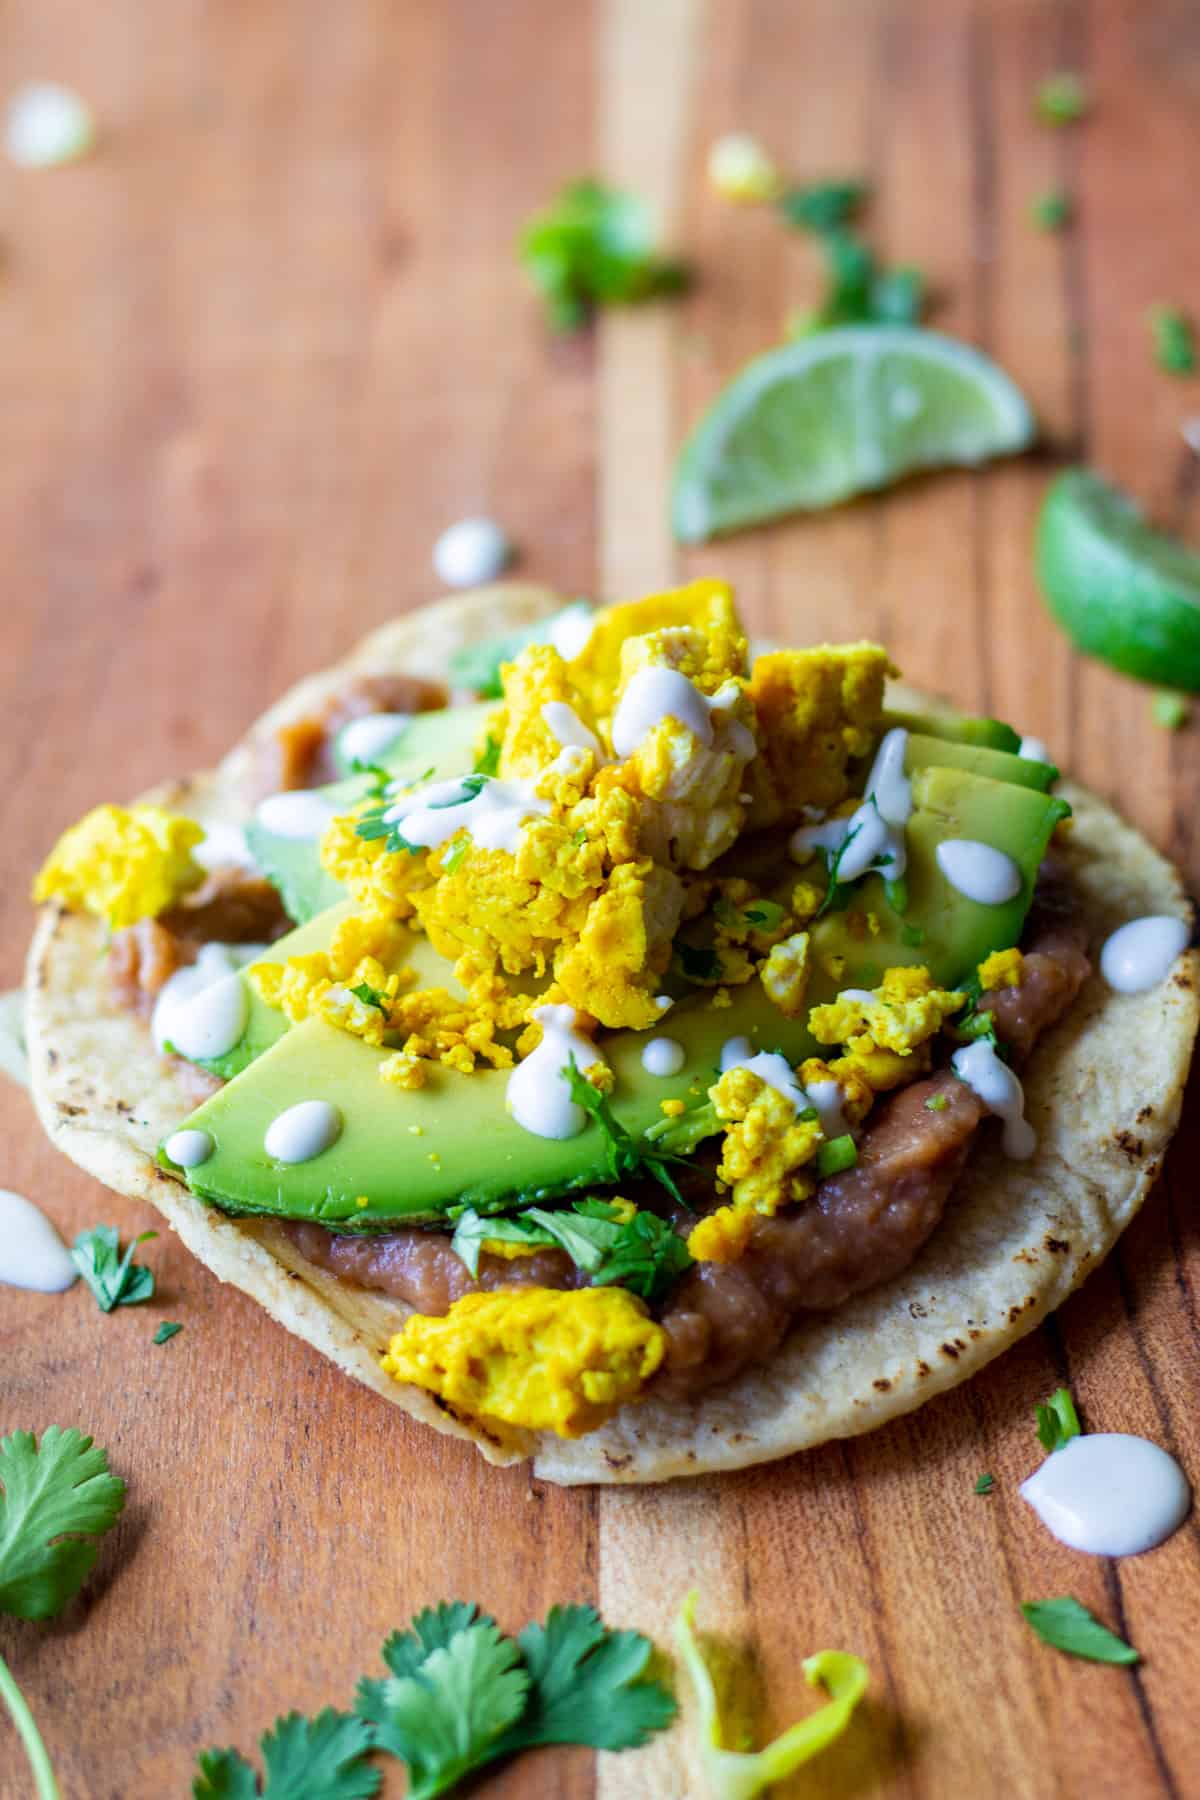 tostada with refried beans, sliced avocado, tofu scramble, crema and cilantro on a wooden board